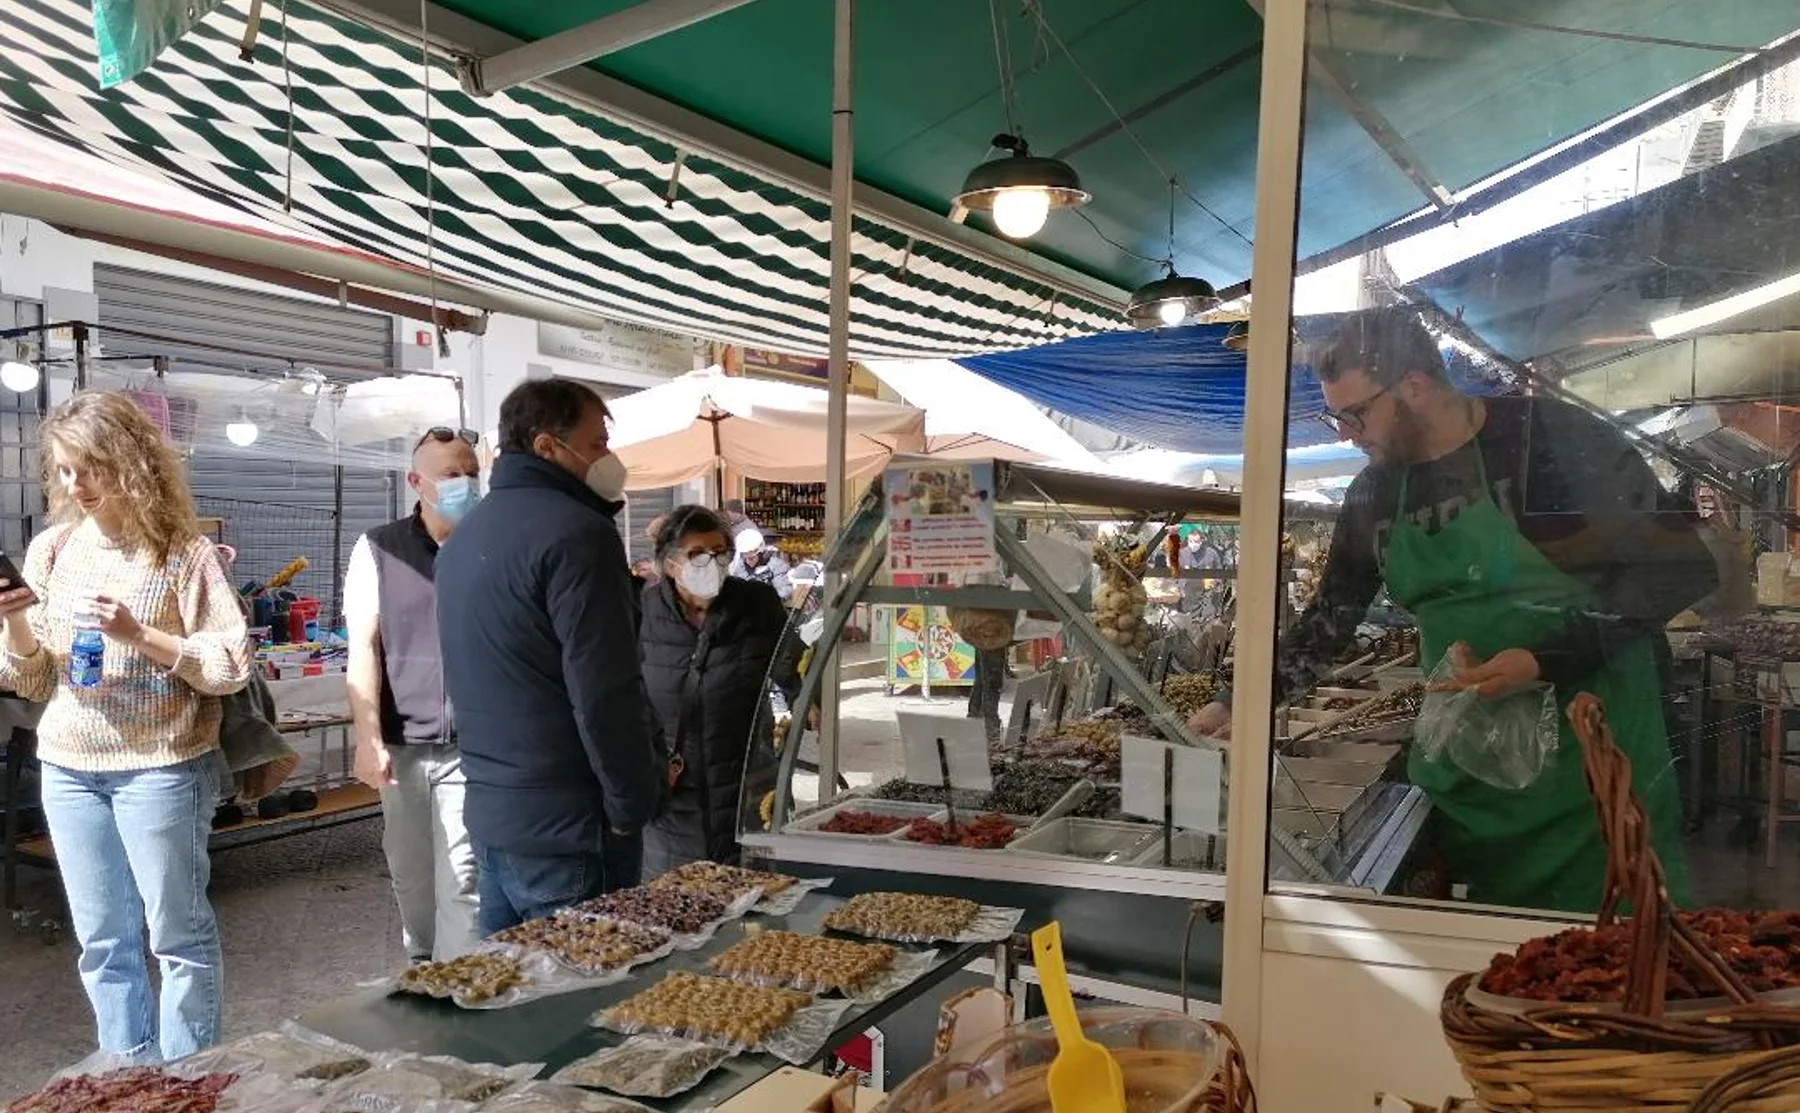 Sicilian market walking  and meal home made preparation and tasting - 1464650